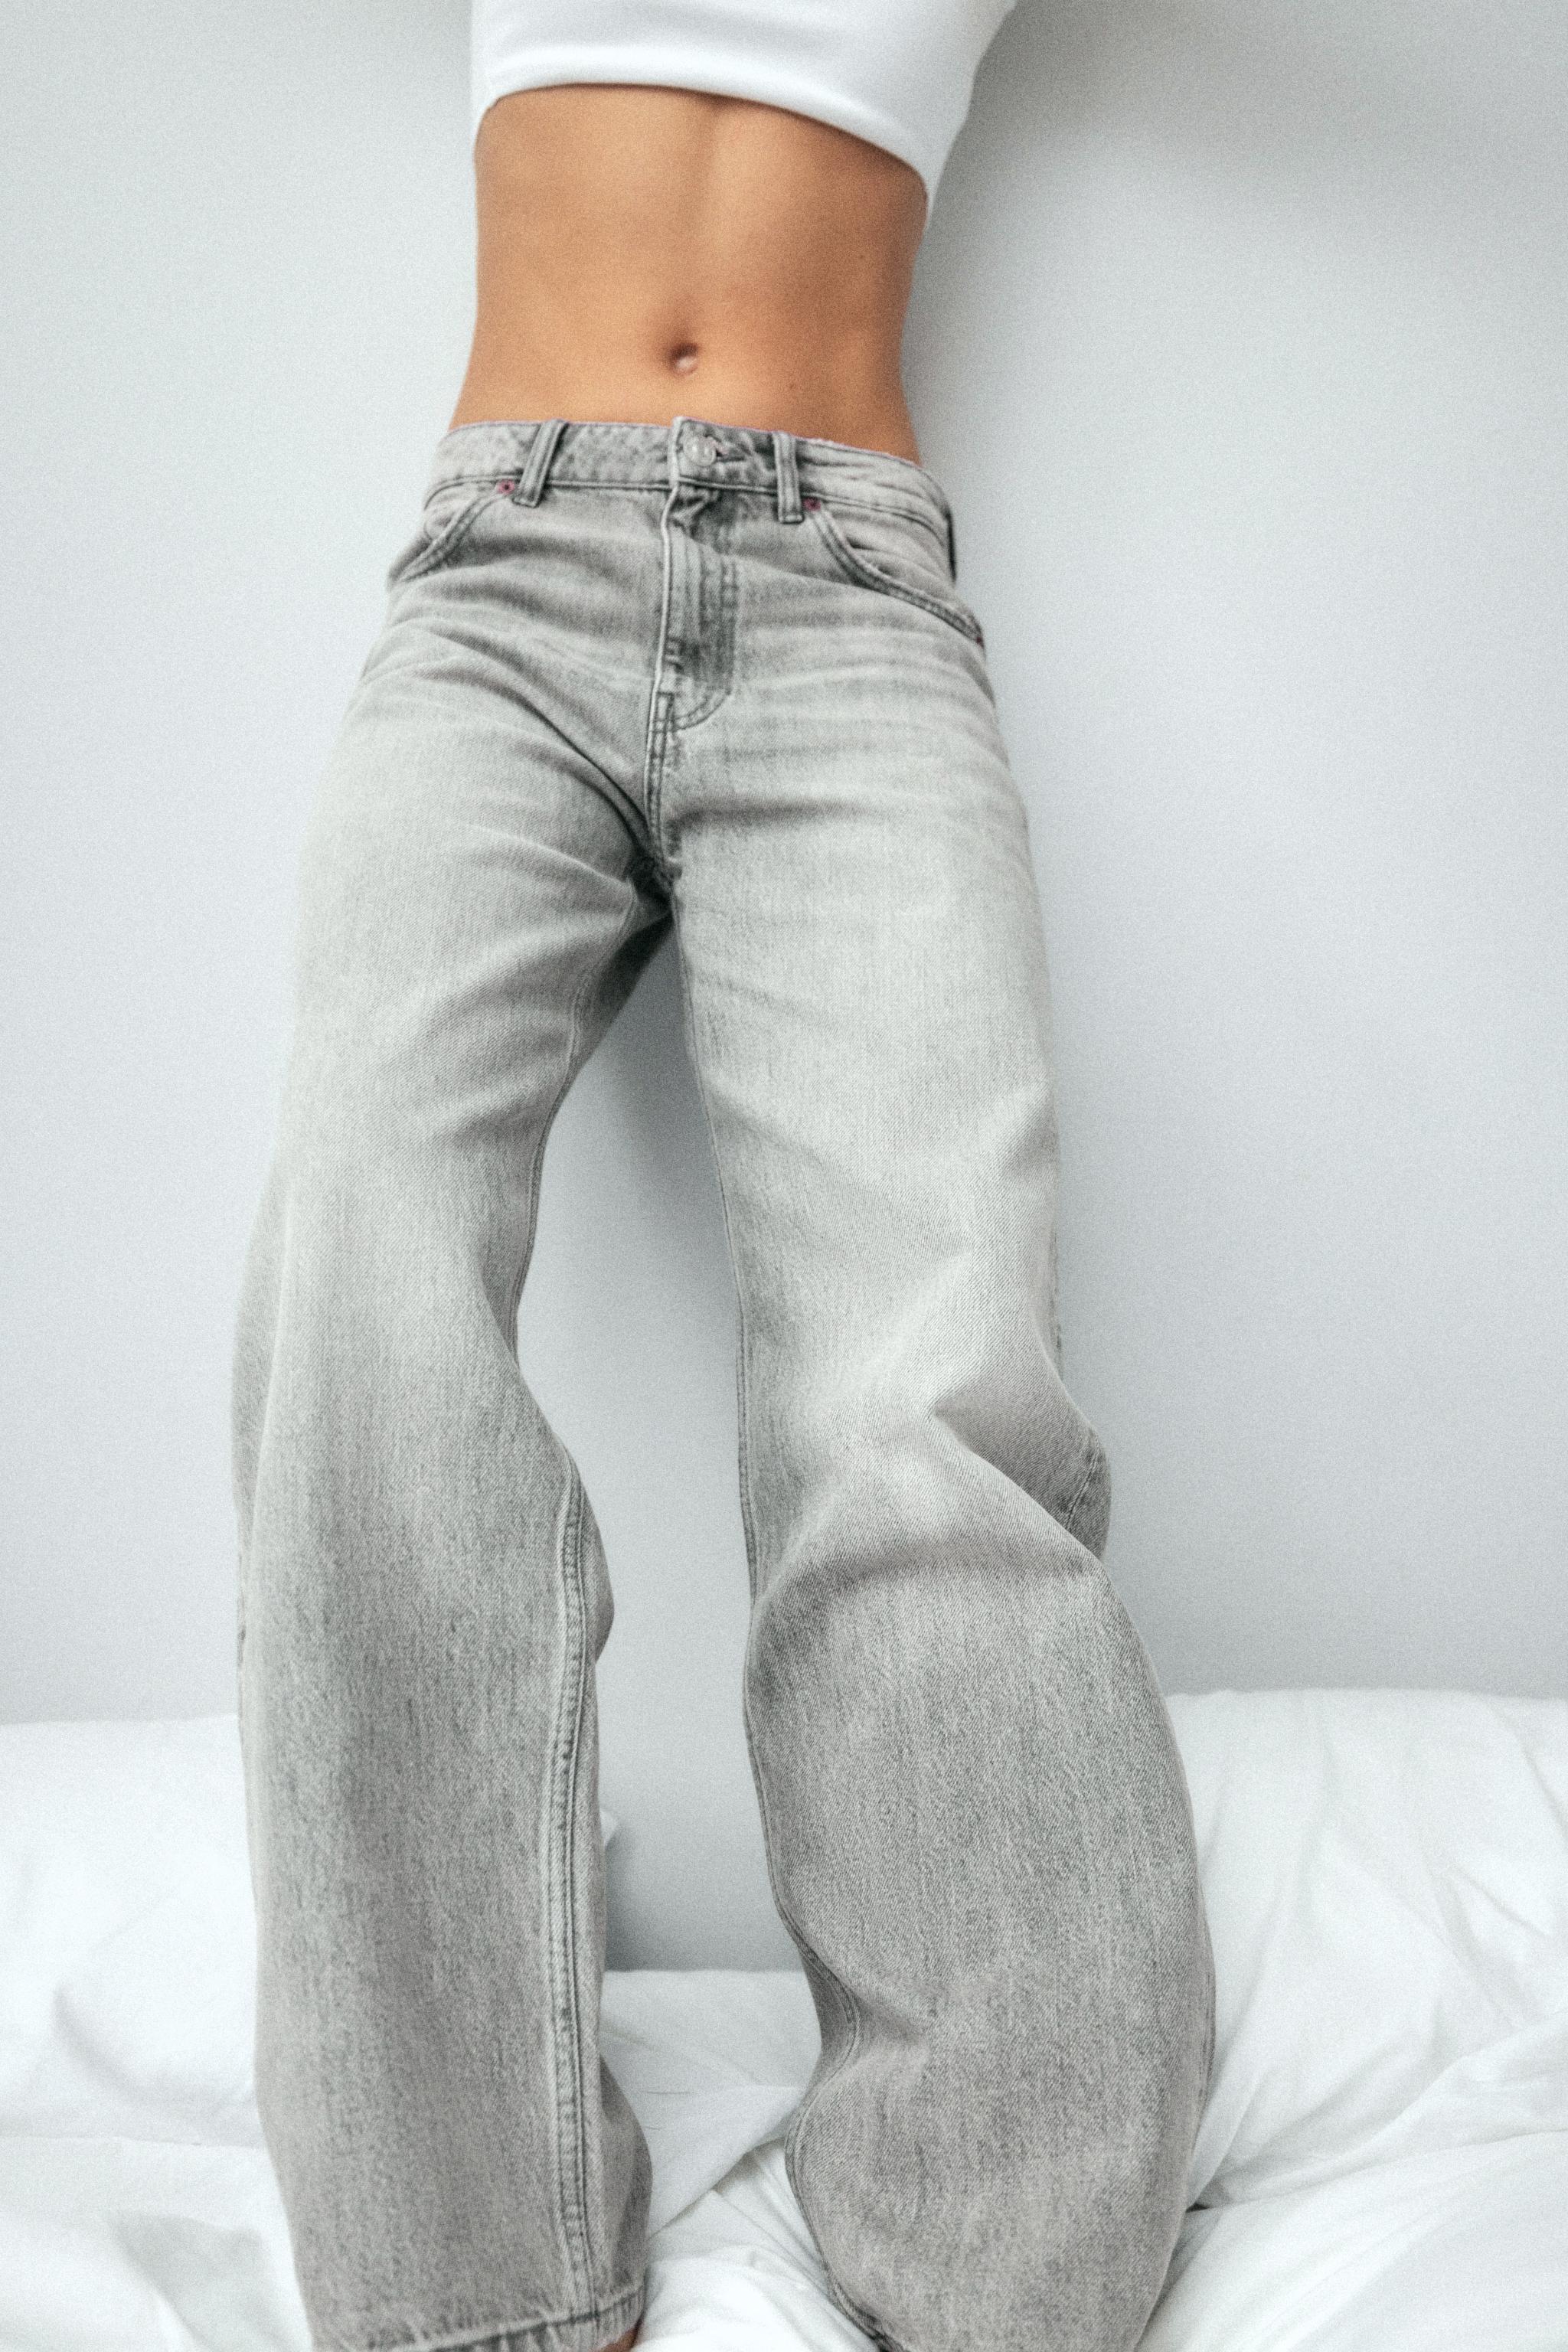 200 MARINA COLLECTION - Grey Stretch Jean, Distressed - Traditional Fit -  Grey -  - GRAND RIVER #200 Grey Stretch Traditional Fit  Jean, GRANDRIVER Grey Stretch Jean, GRAND RIVER, GRANDRIVER, RIVER